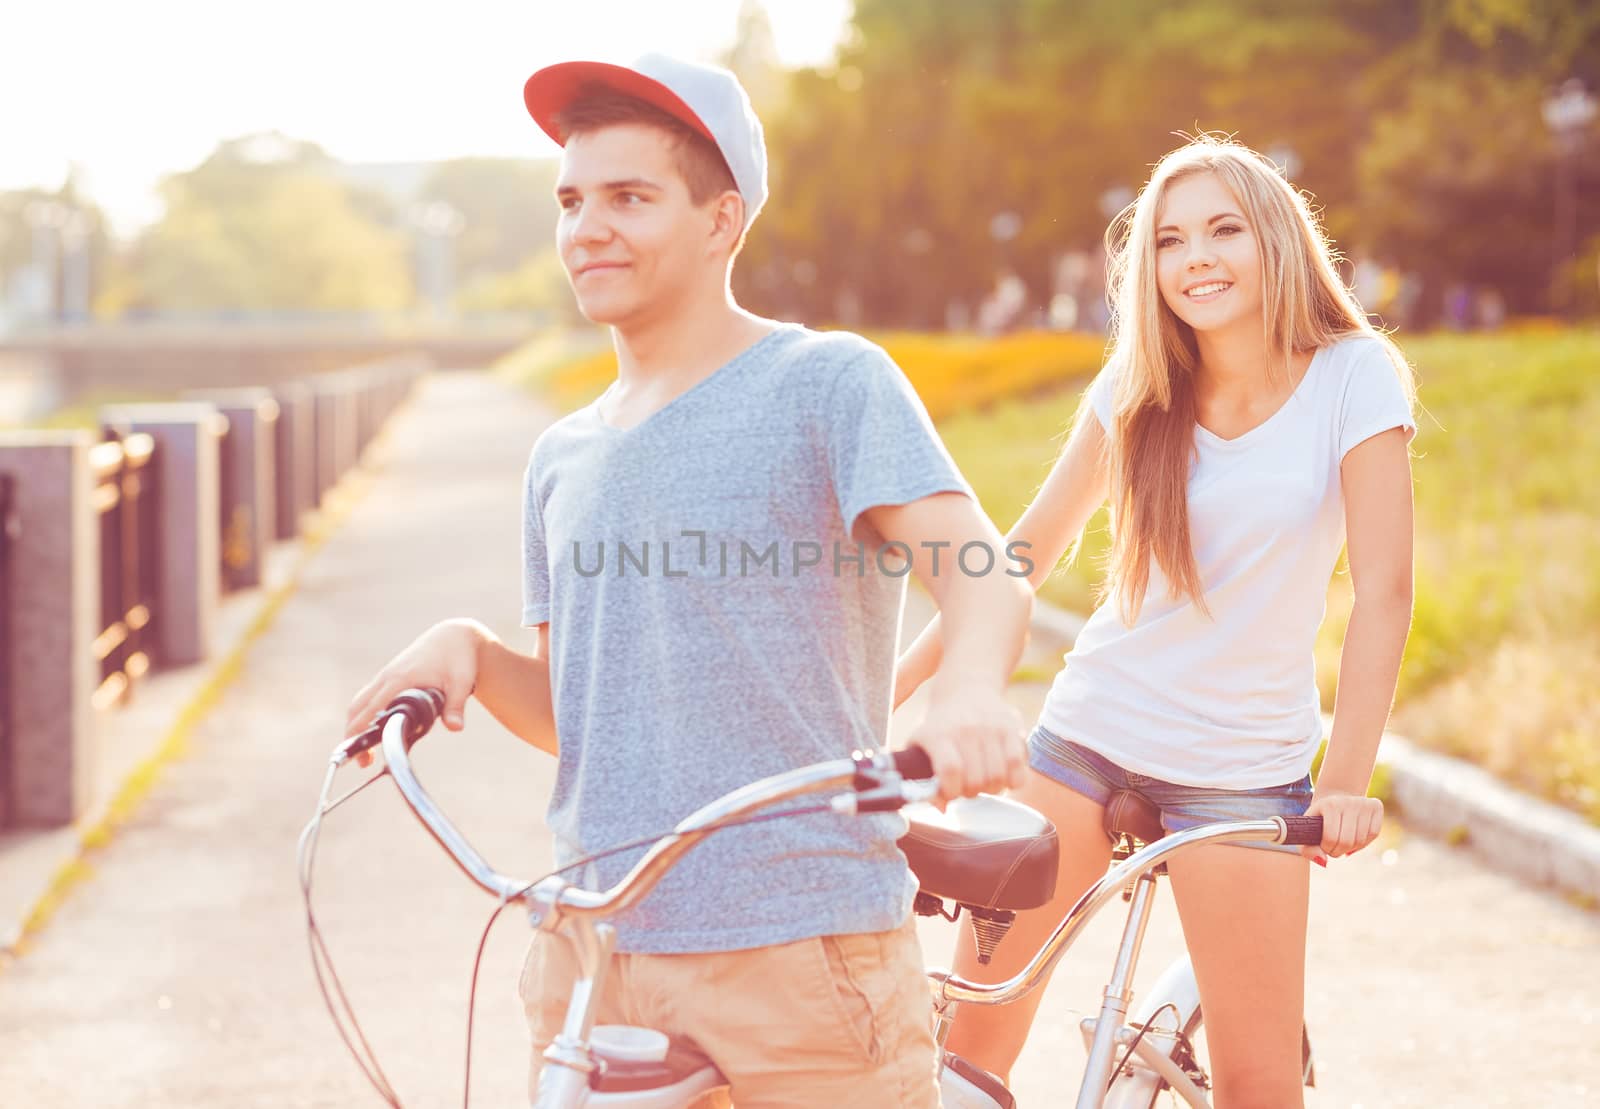 Happy couple - man and woman riding a bicycle in the park outdoo by vlad_star